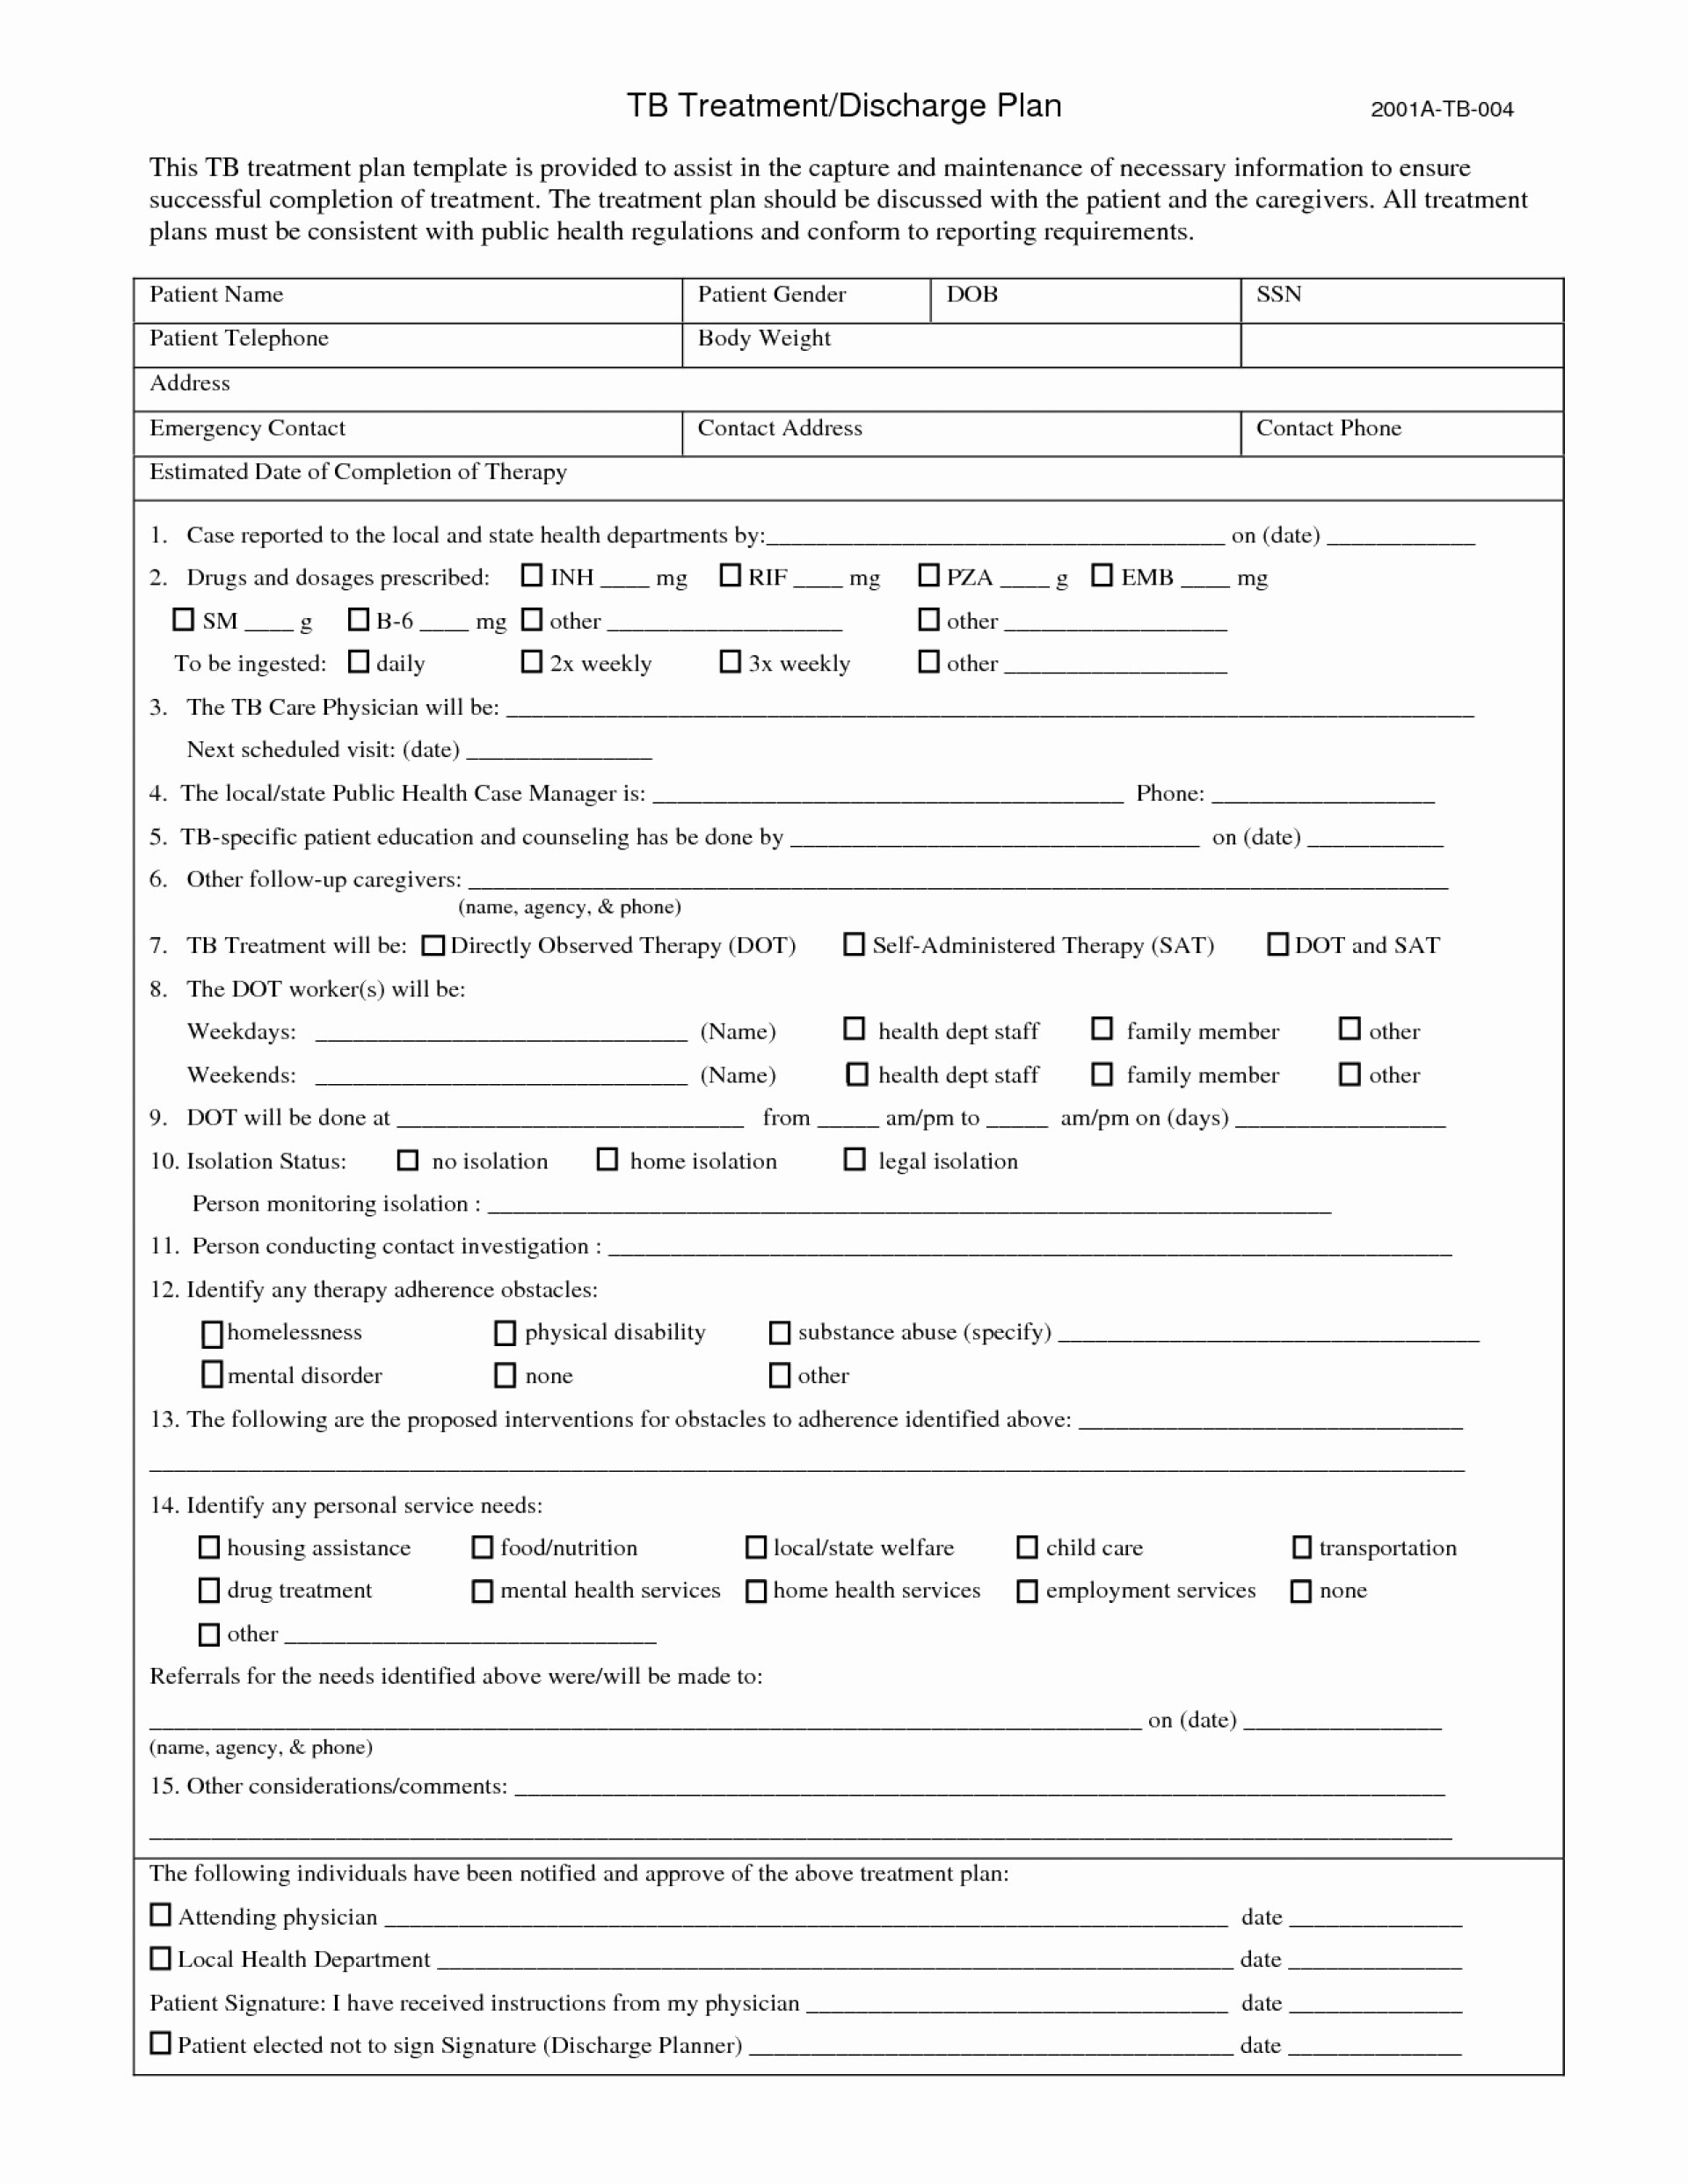 Family Safety Plan Template Best Of 014 Plan Template orig social Work Tinypetition